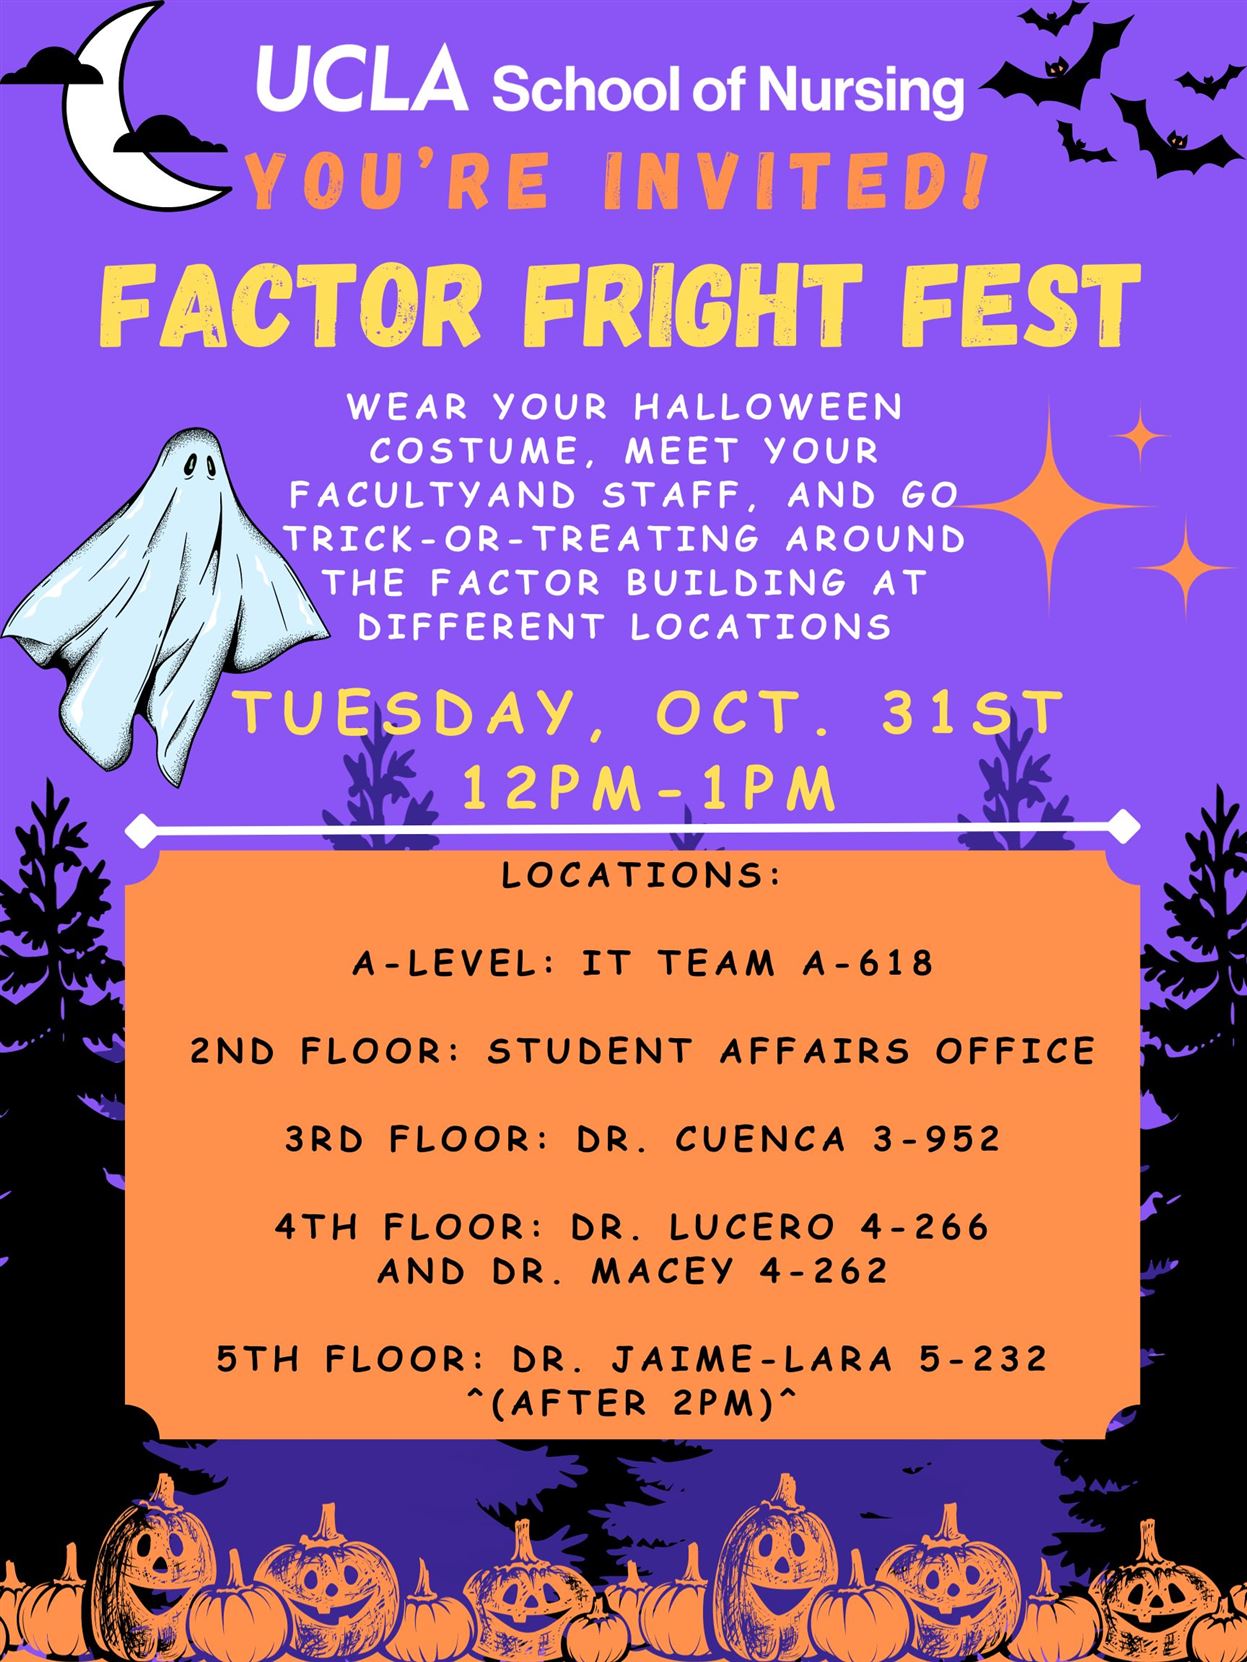 You're invited to the Factor Frigth Fest on Tuesday, October 31st from 12 to 1pm